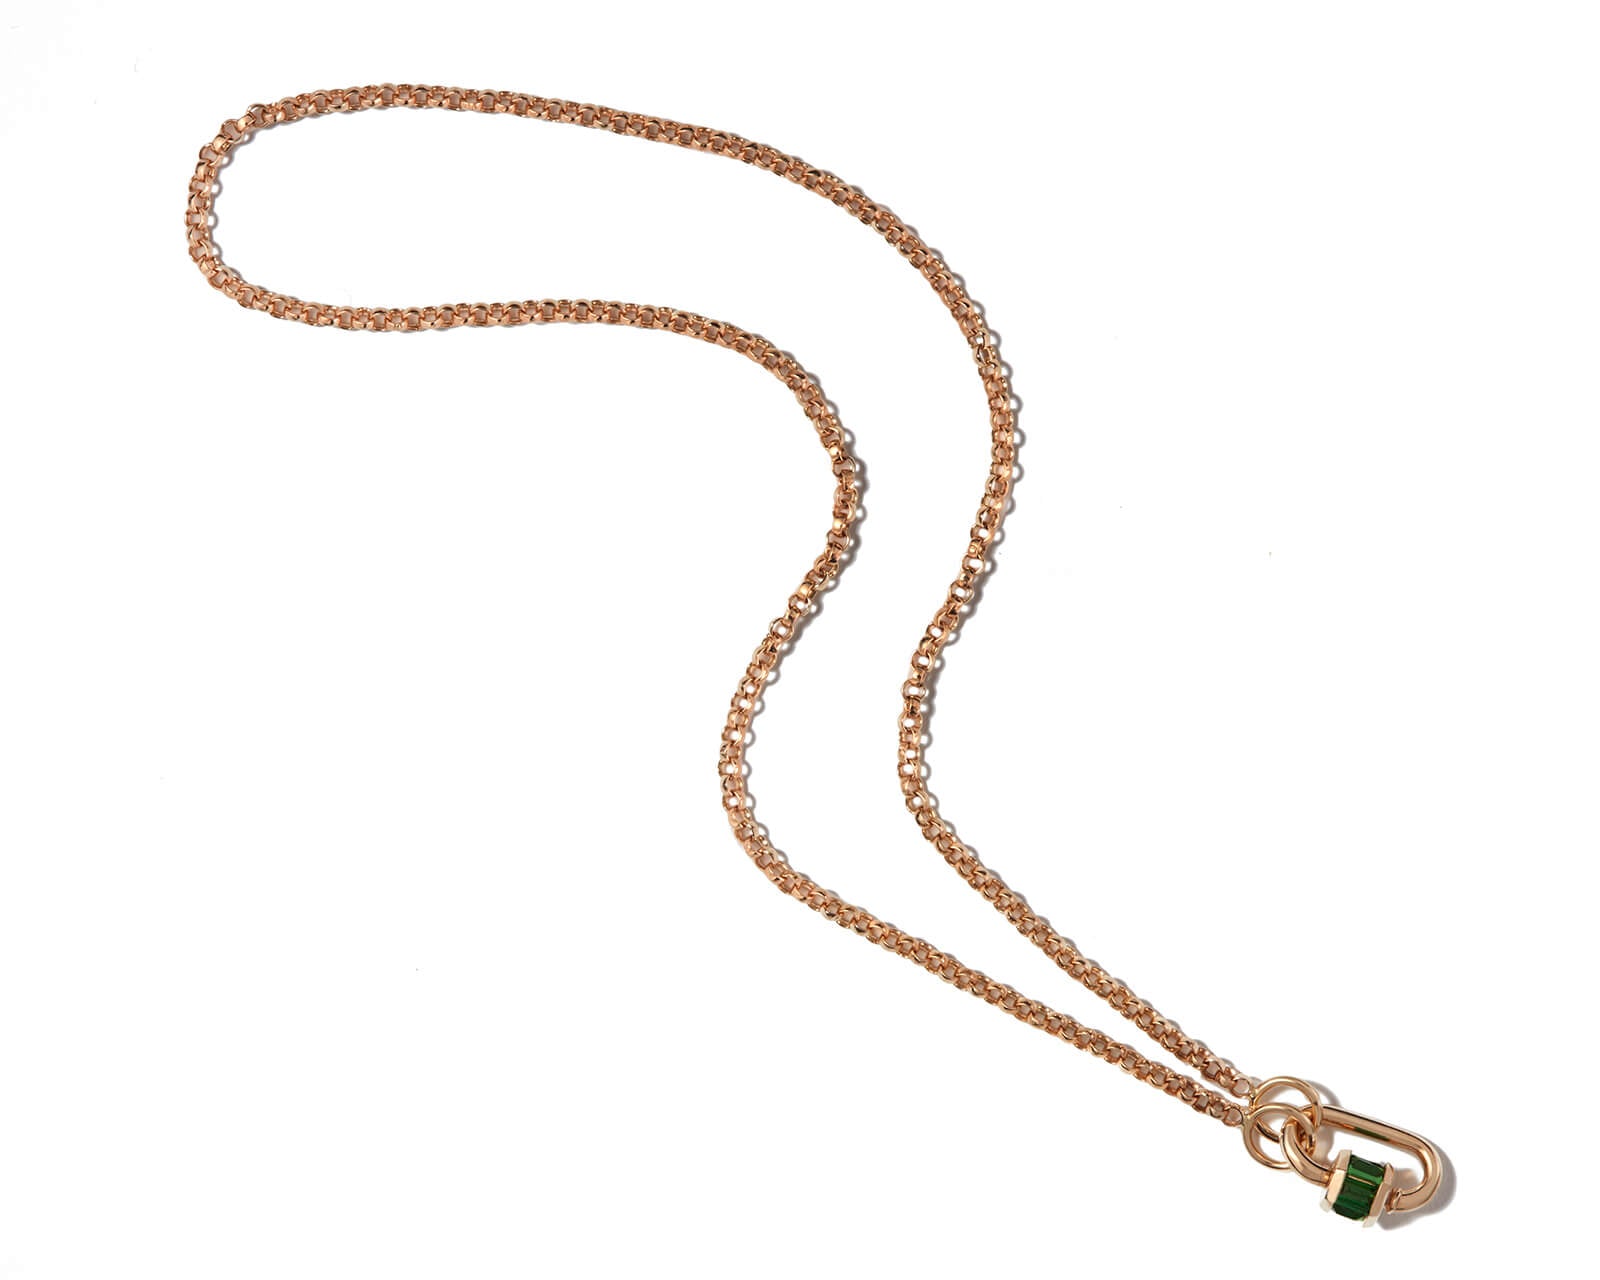 Green garnet charm attached to gold chain against white backdrop